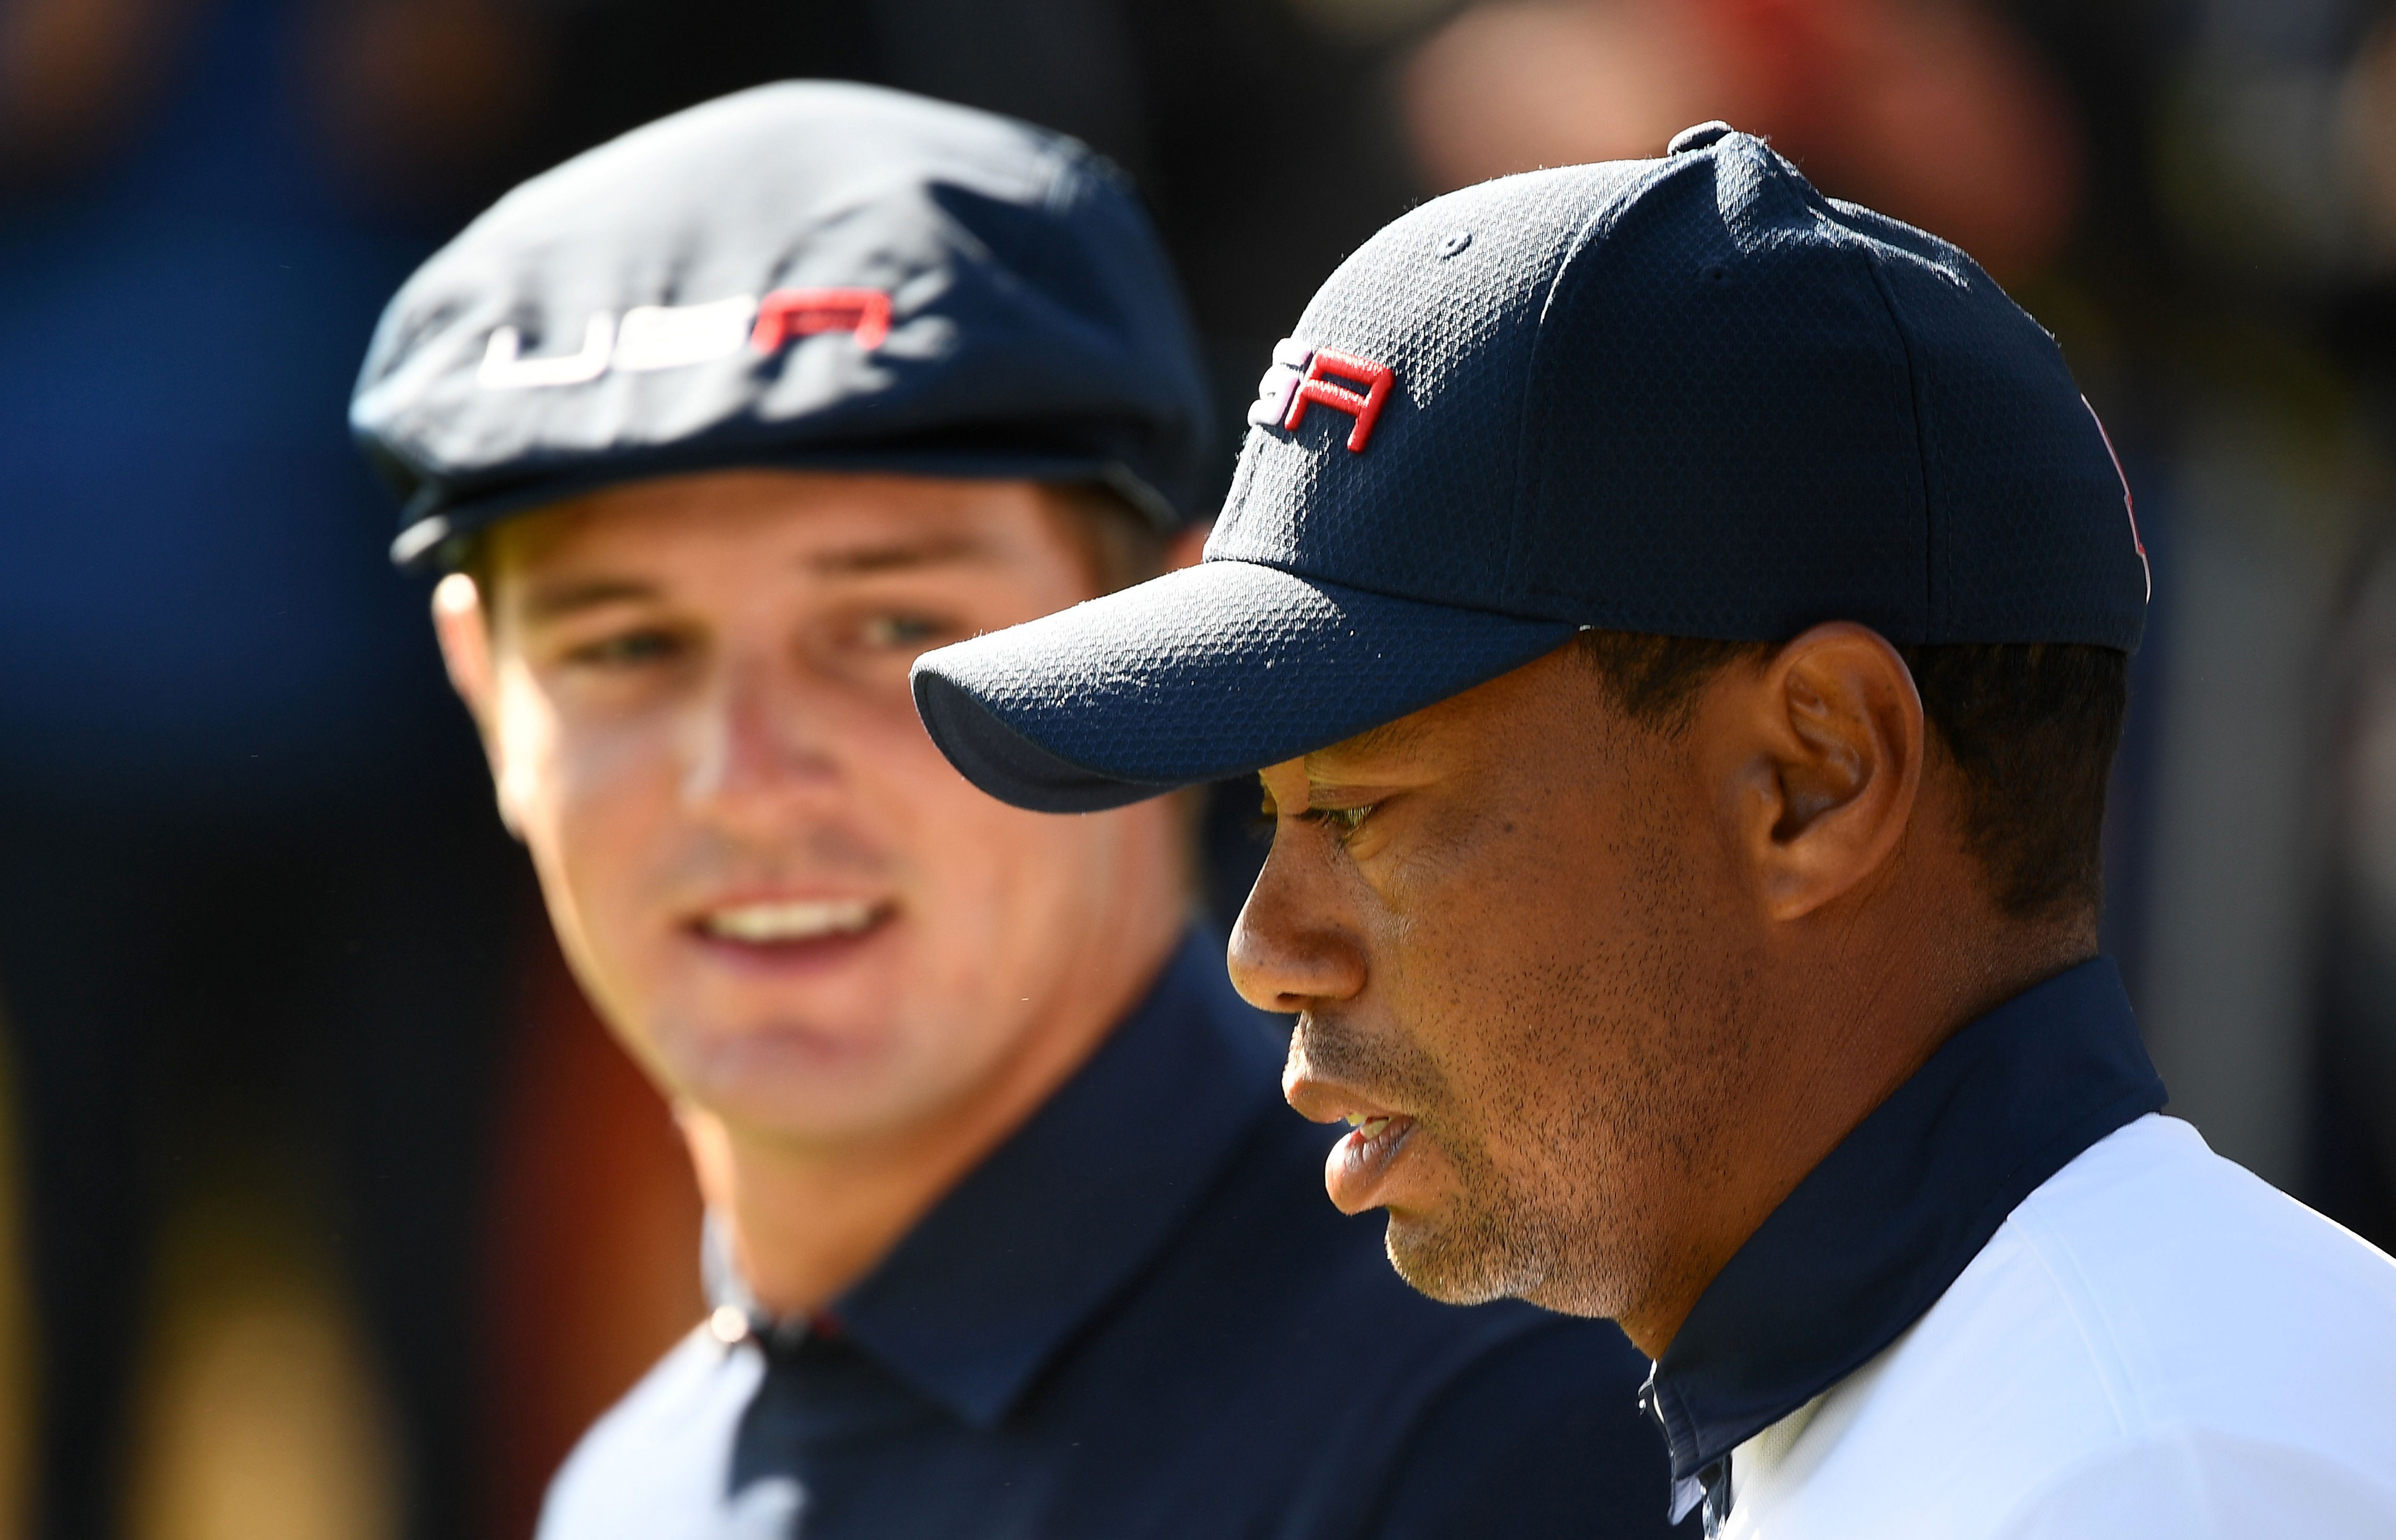 Tiger Woods: I'm pissed off with losing 3 times at Ryder Cup 